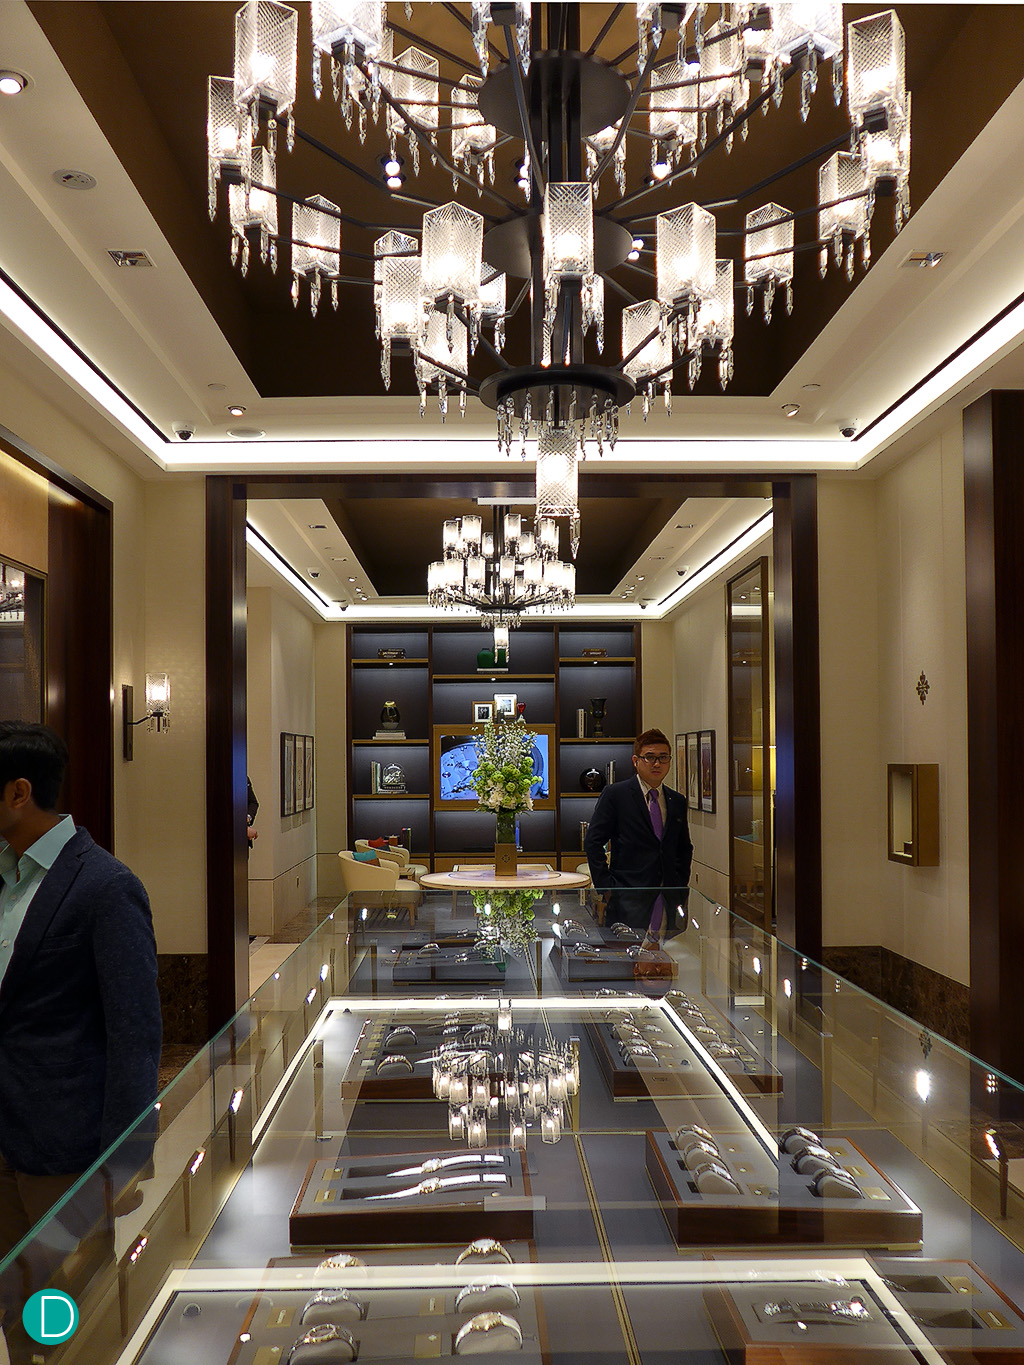 The entrance foyer of the new Patek Philippe boutique, looking towards the left as one enters, into additional rooms which can be closed off for a private customer experience.The showcase is immense, and able to display a larger number of watches for sale.